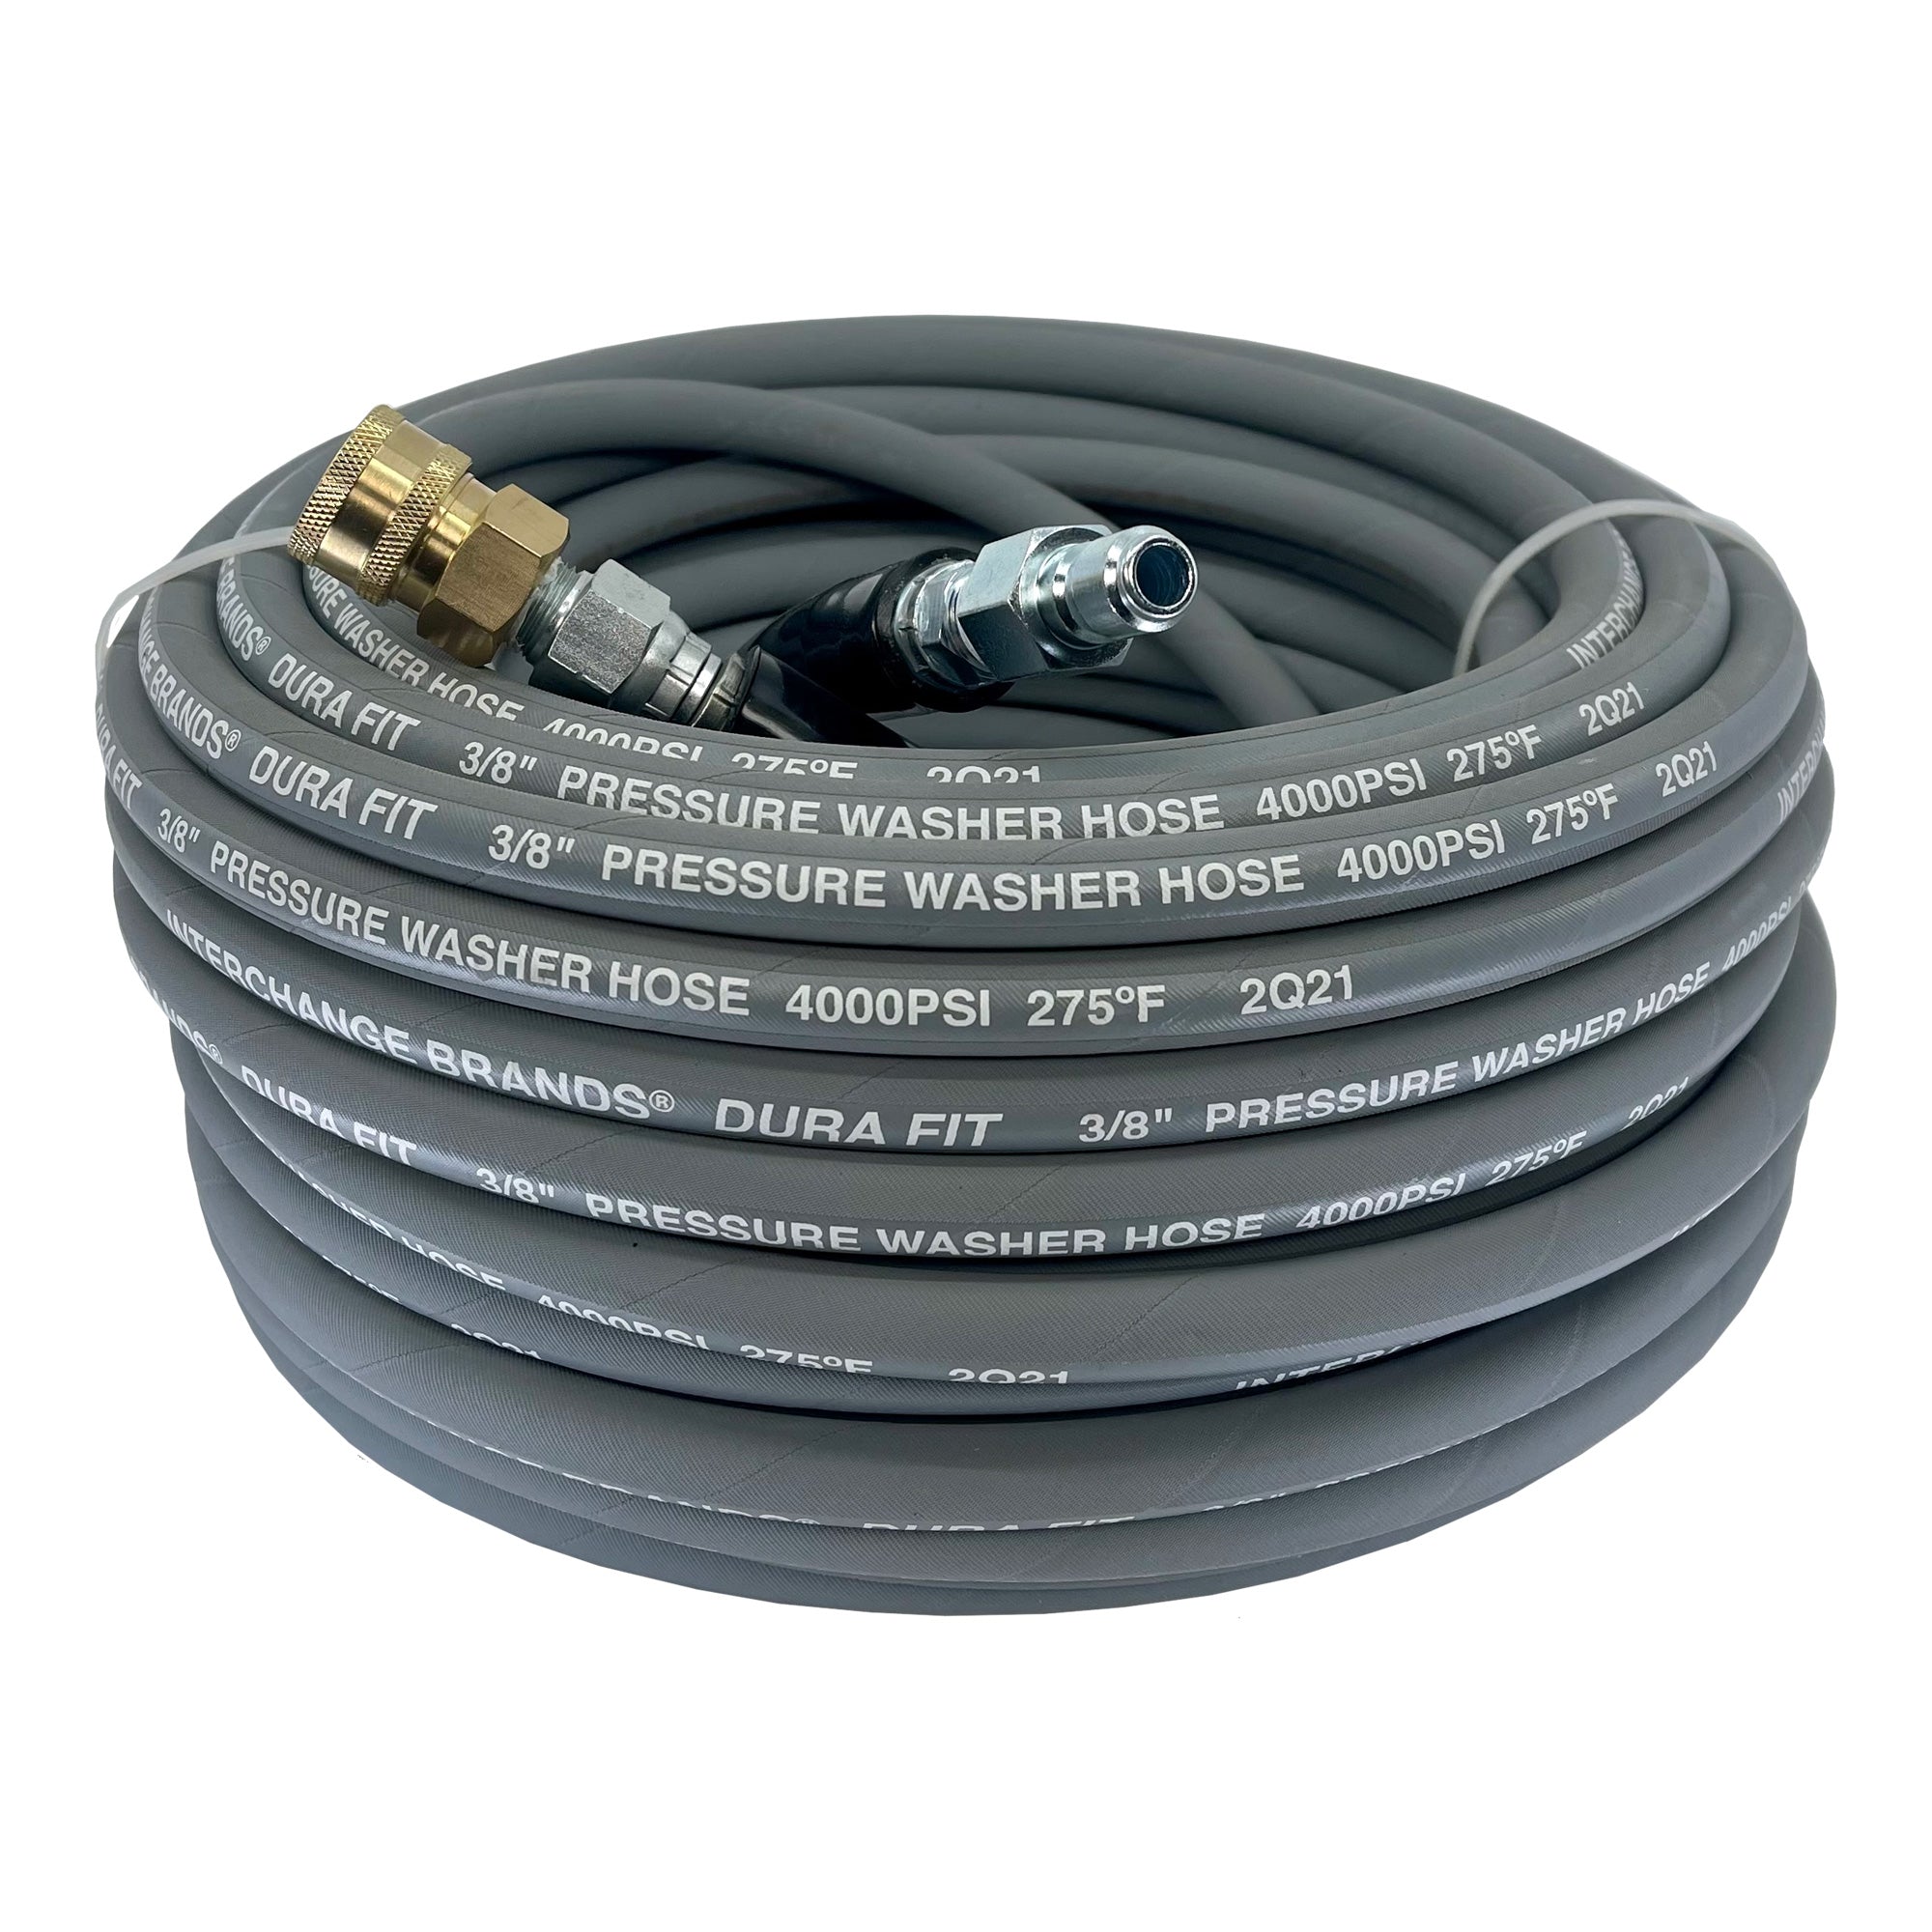 3/8" x 100' 4000 PSI Gray Non-Marking Pressure Washer Hoses w/ Quick Connects (2pack)